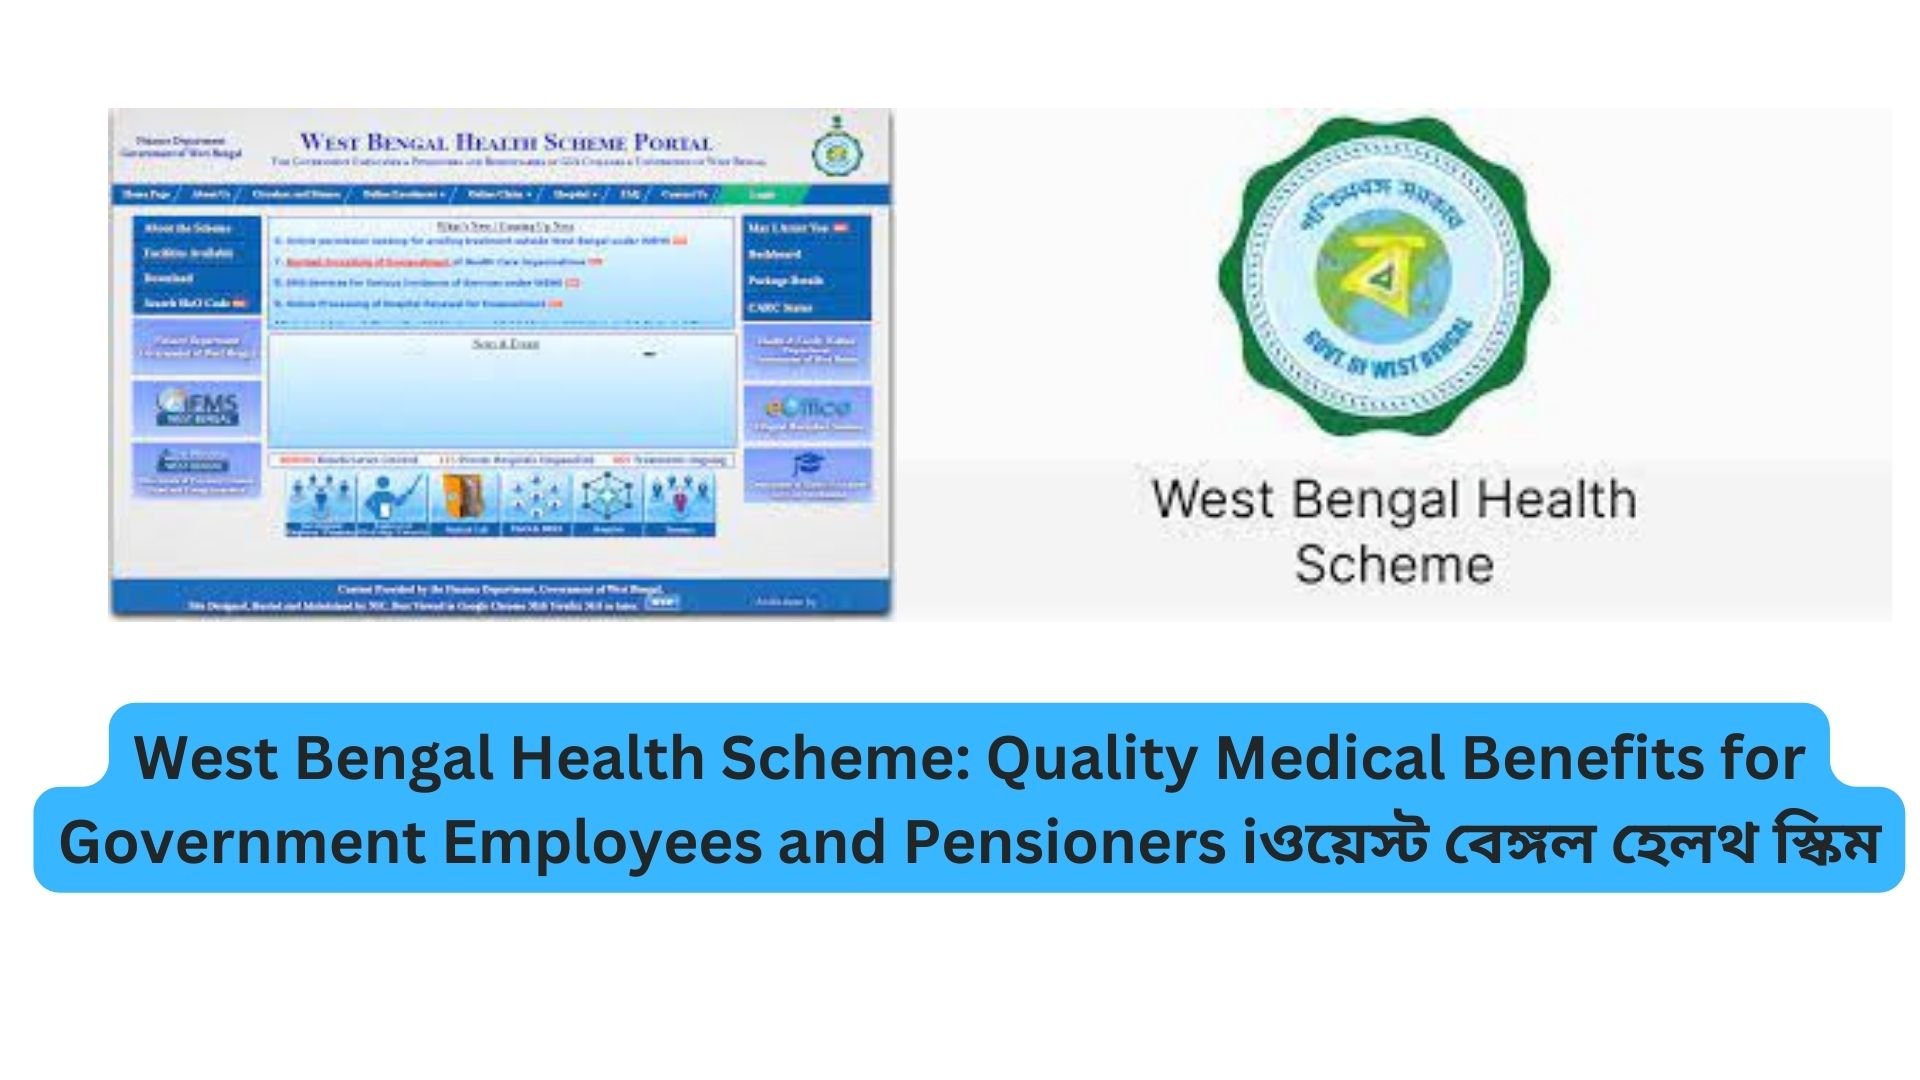 West Bengal Health Scheme: Quality Medical Benefits for Government Employees and Pensioners iওয়েস্ট বেঙ্গল হেলথ স্কিম